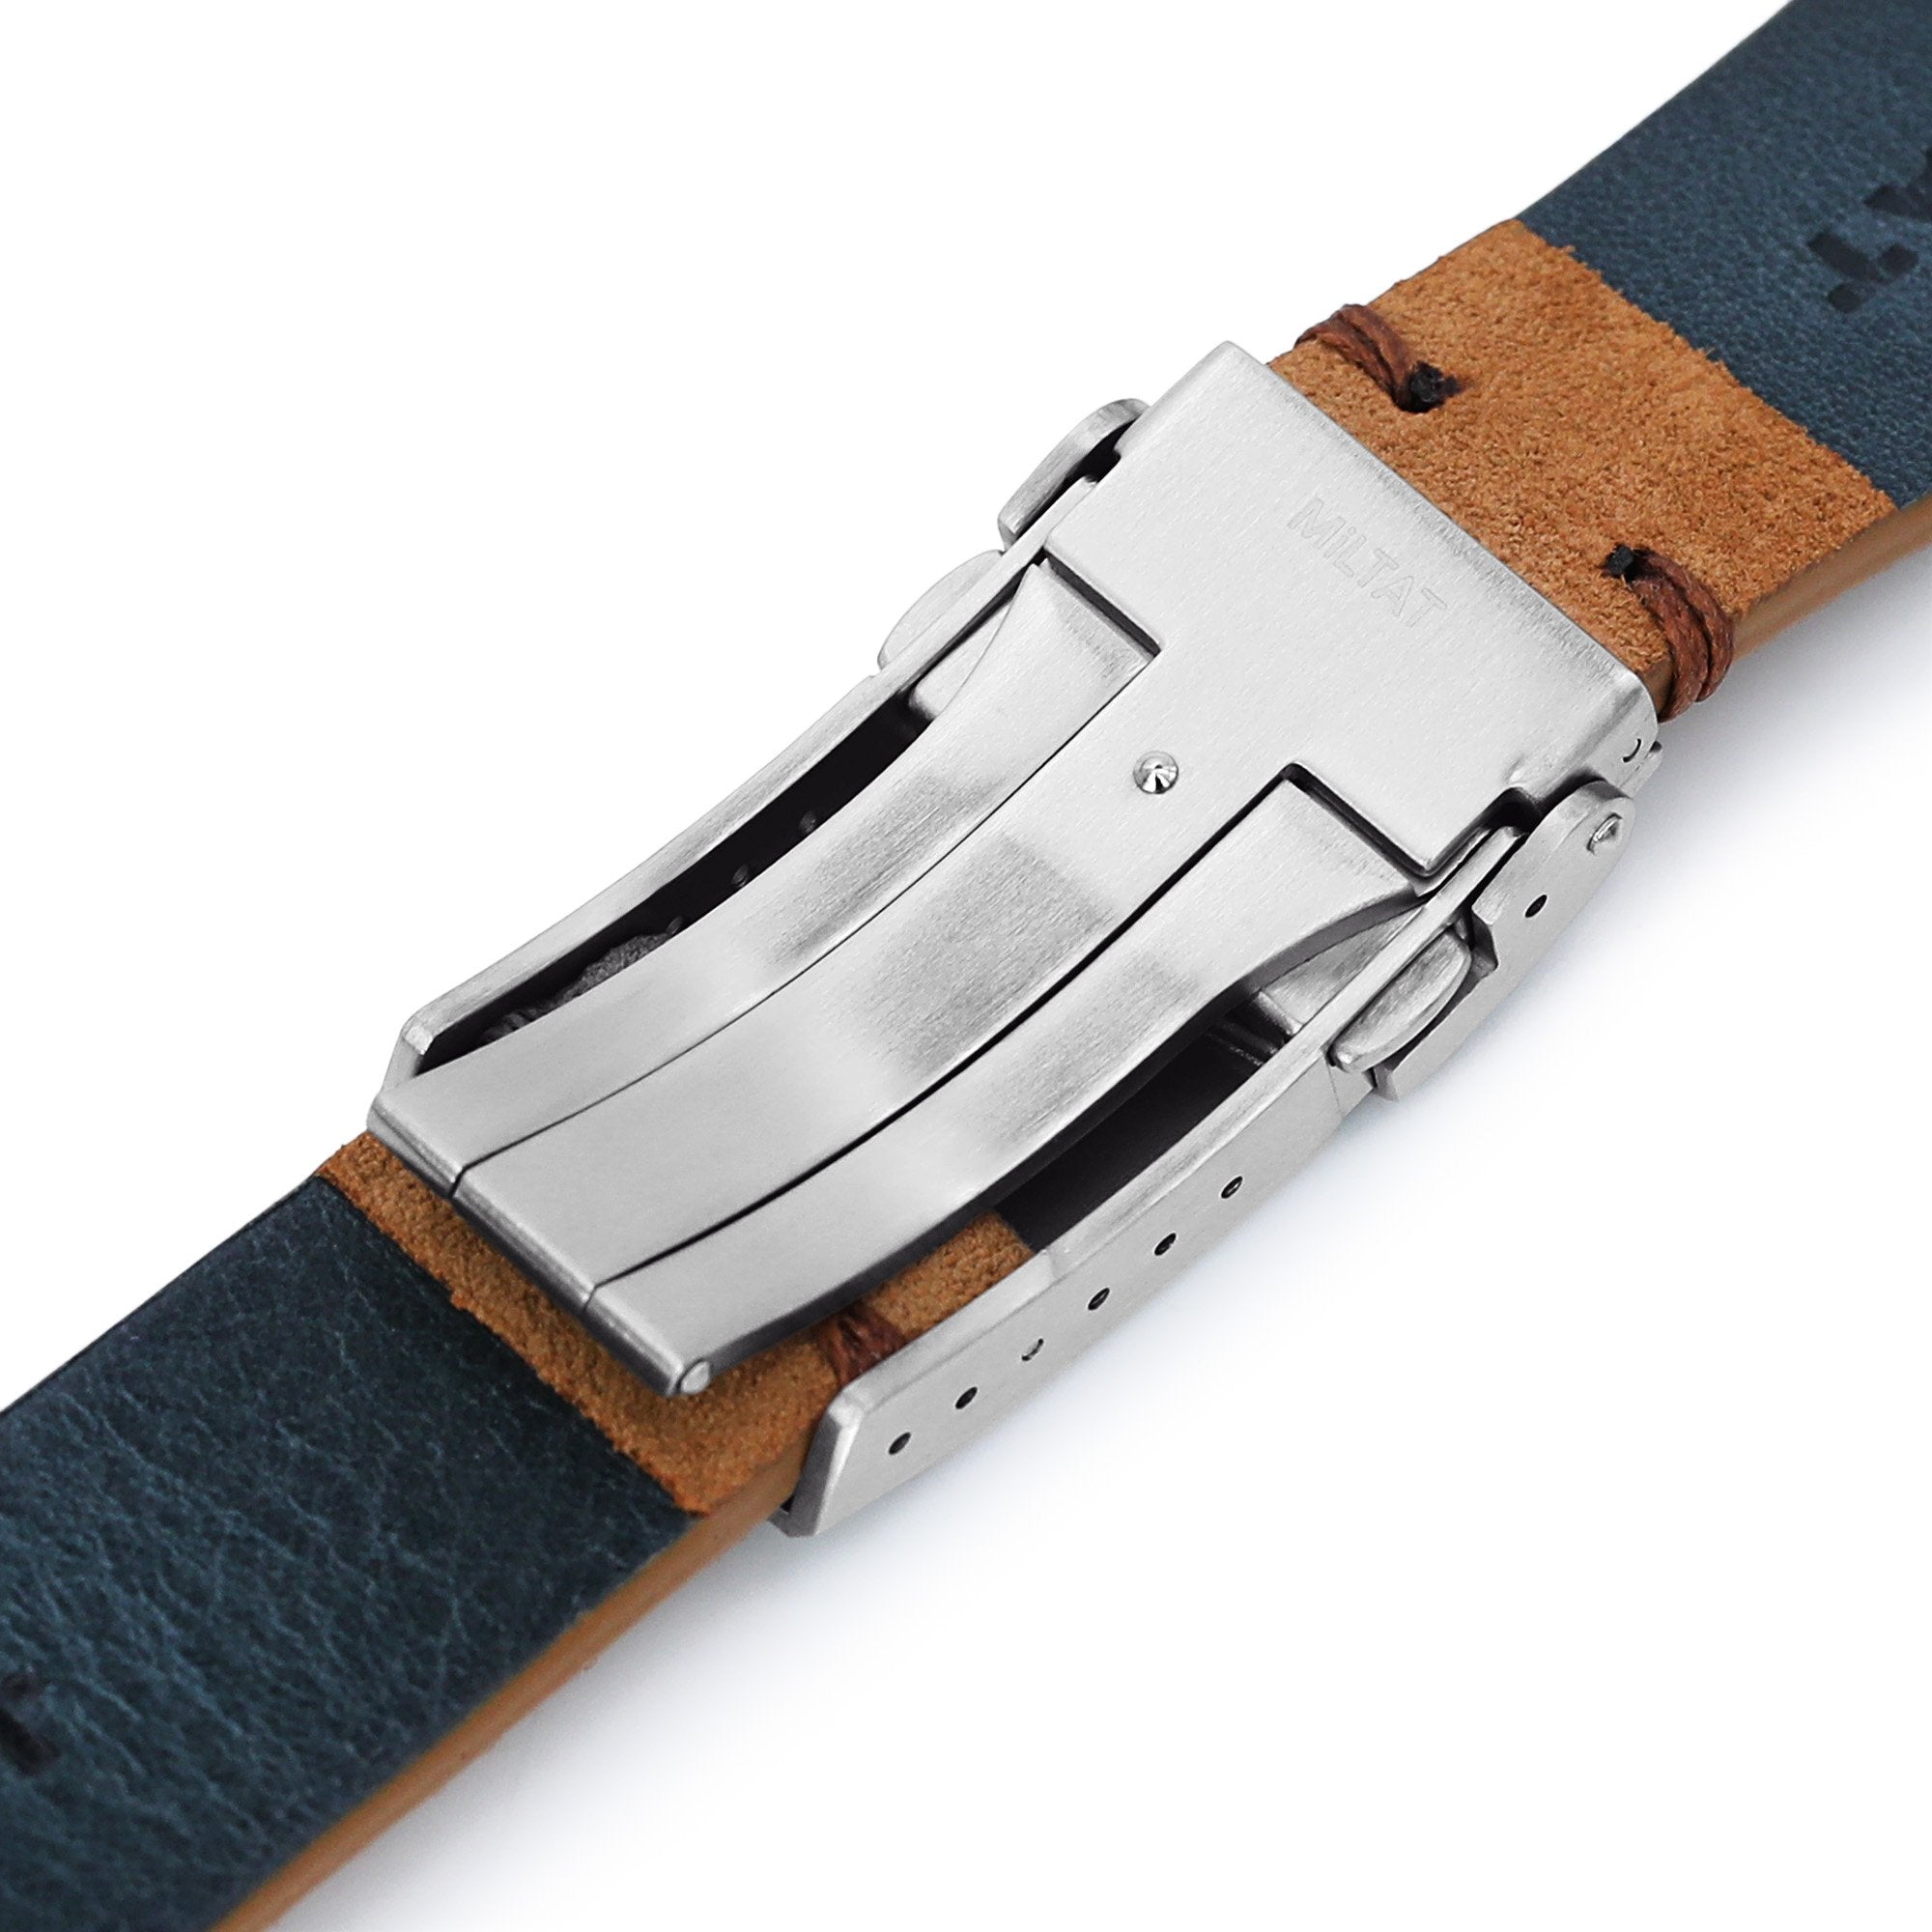 Shop Aftermarket Panerai Straps - Leather Watch Bands & More